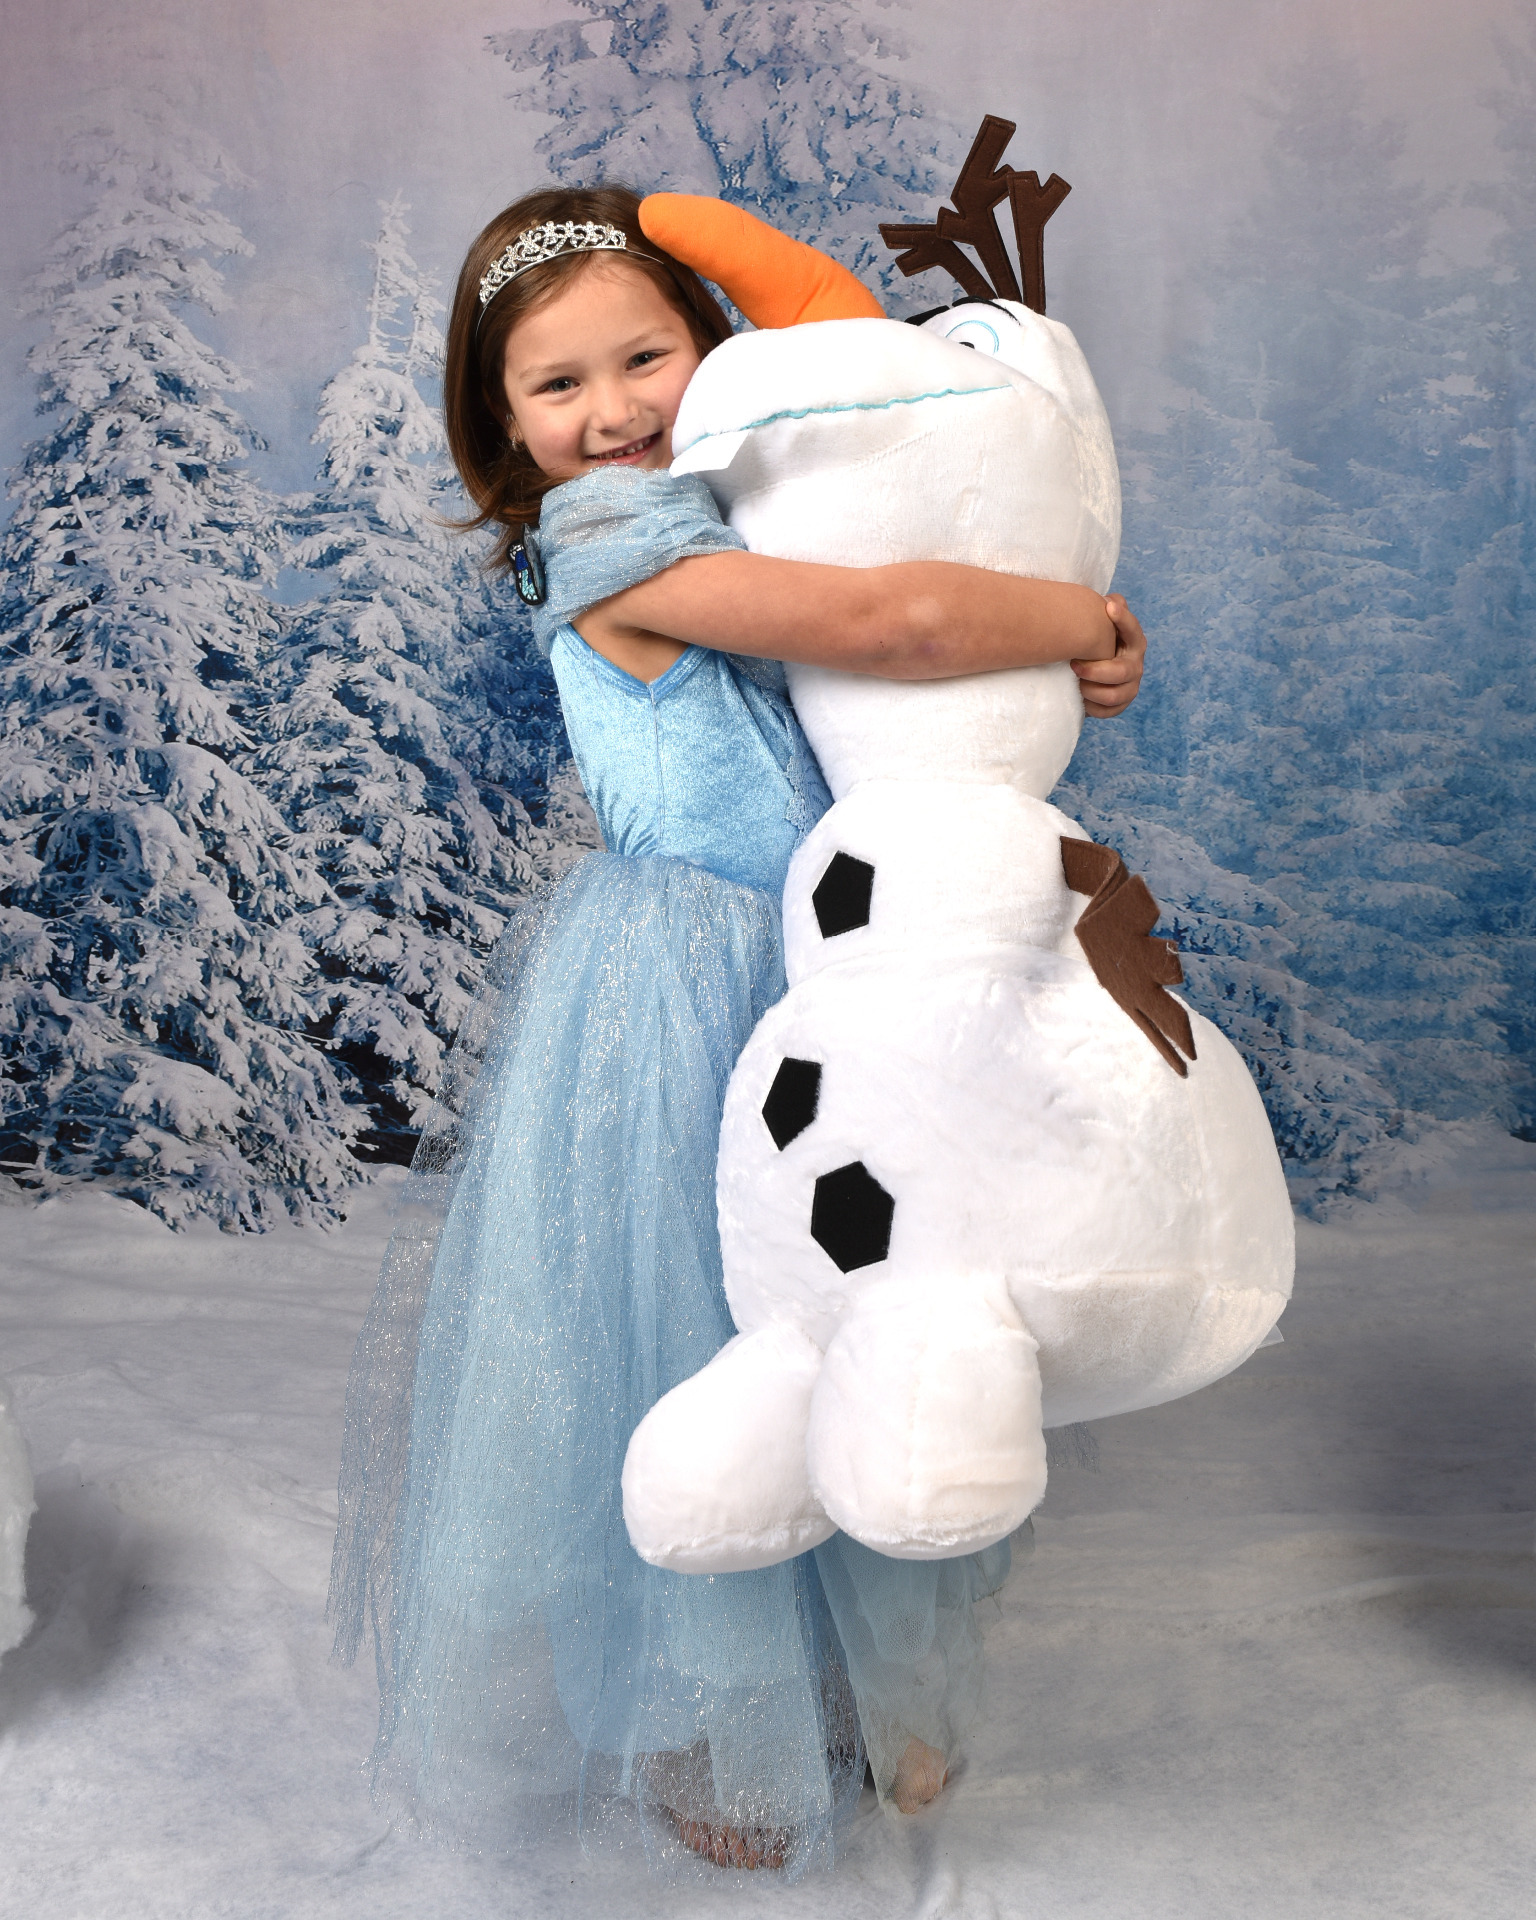 Become Elsa from Frozen and have your photo taken with Olaf in our Stafford studio